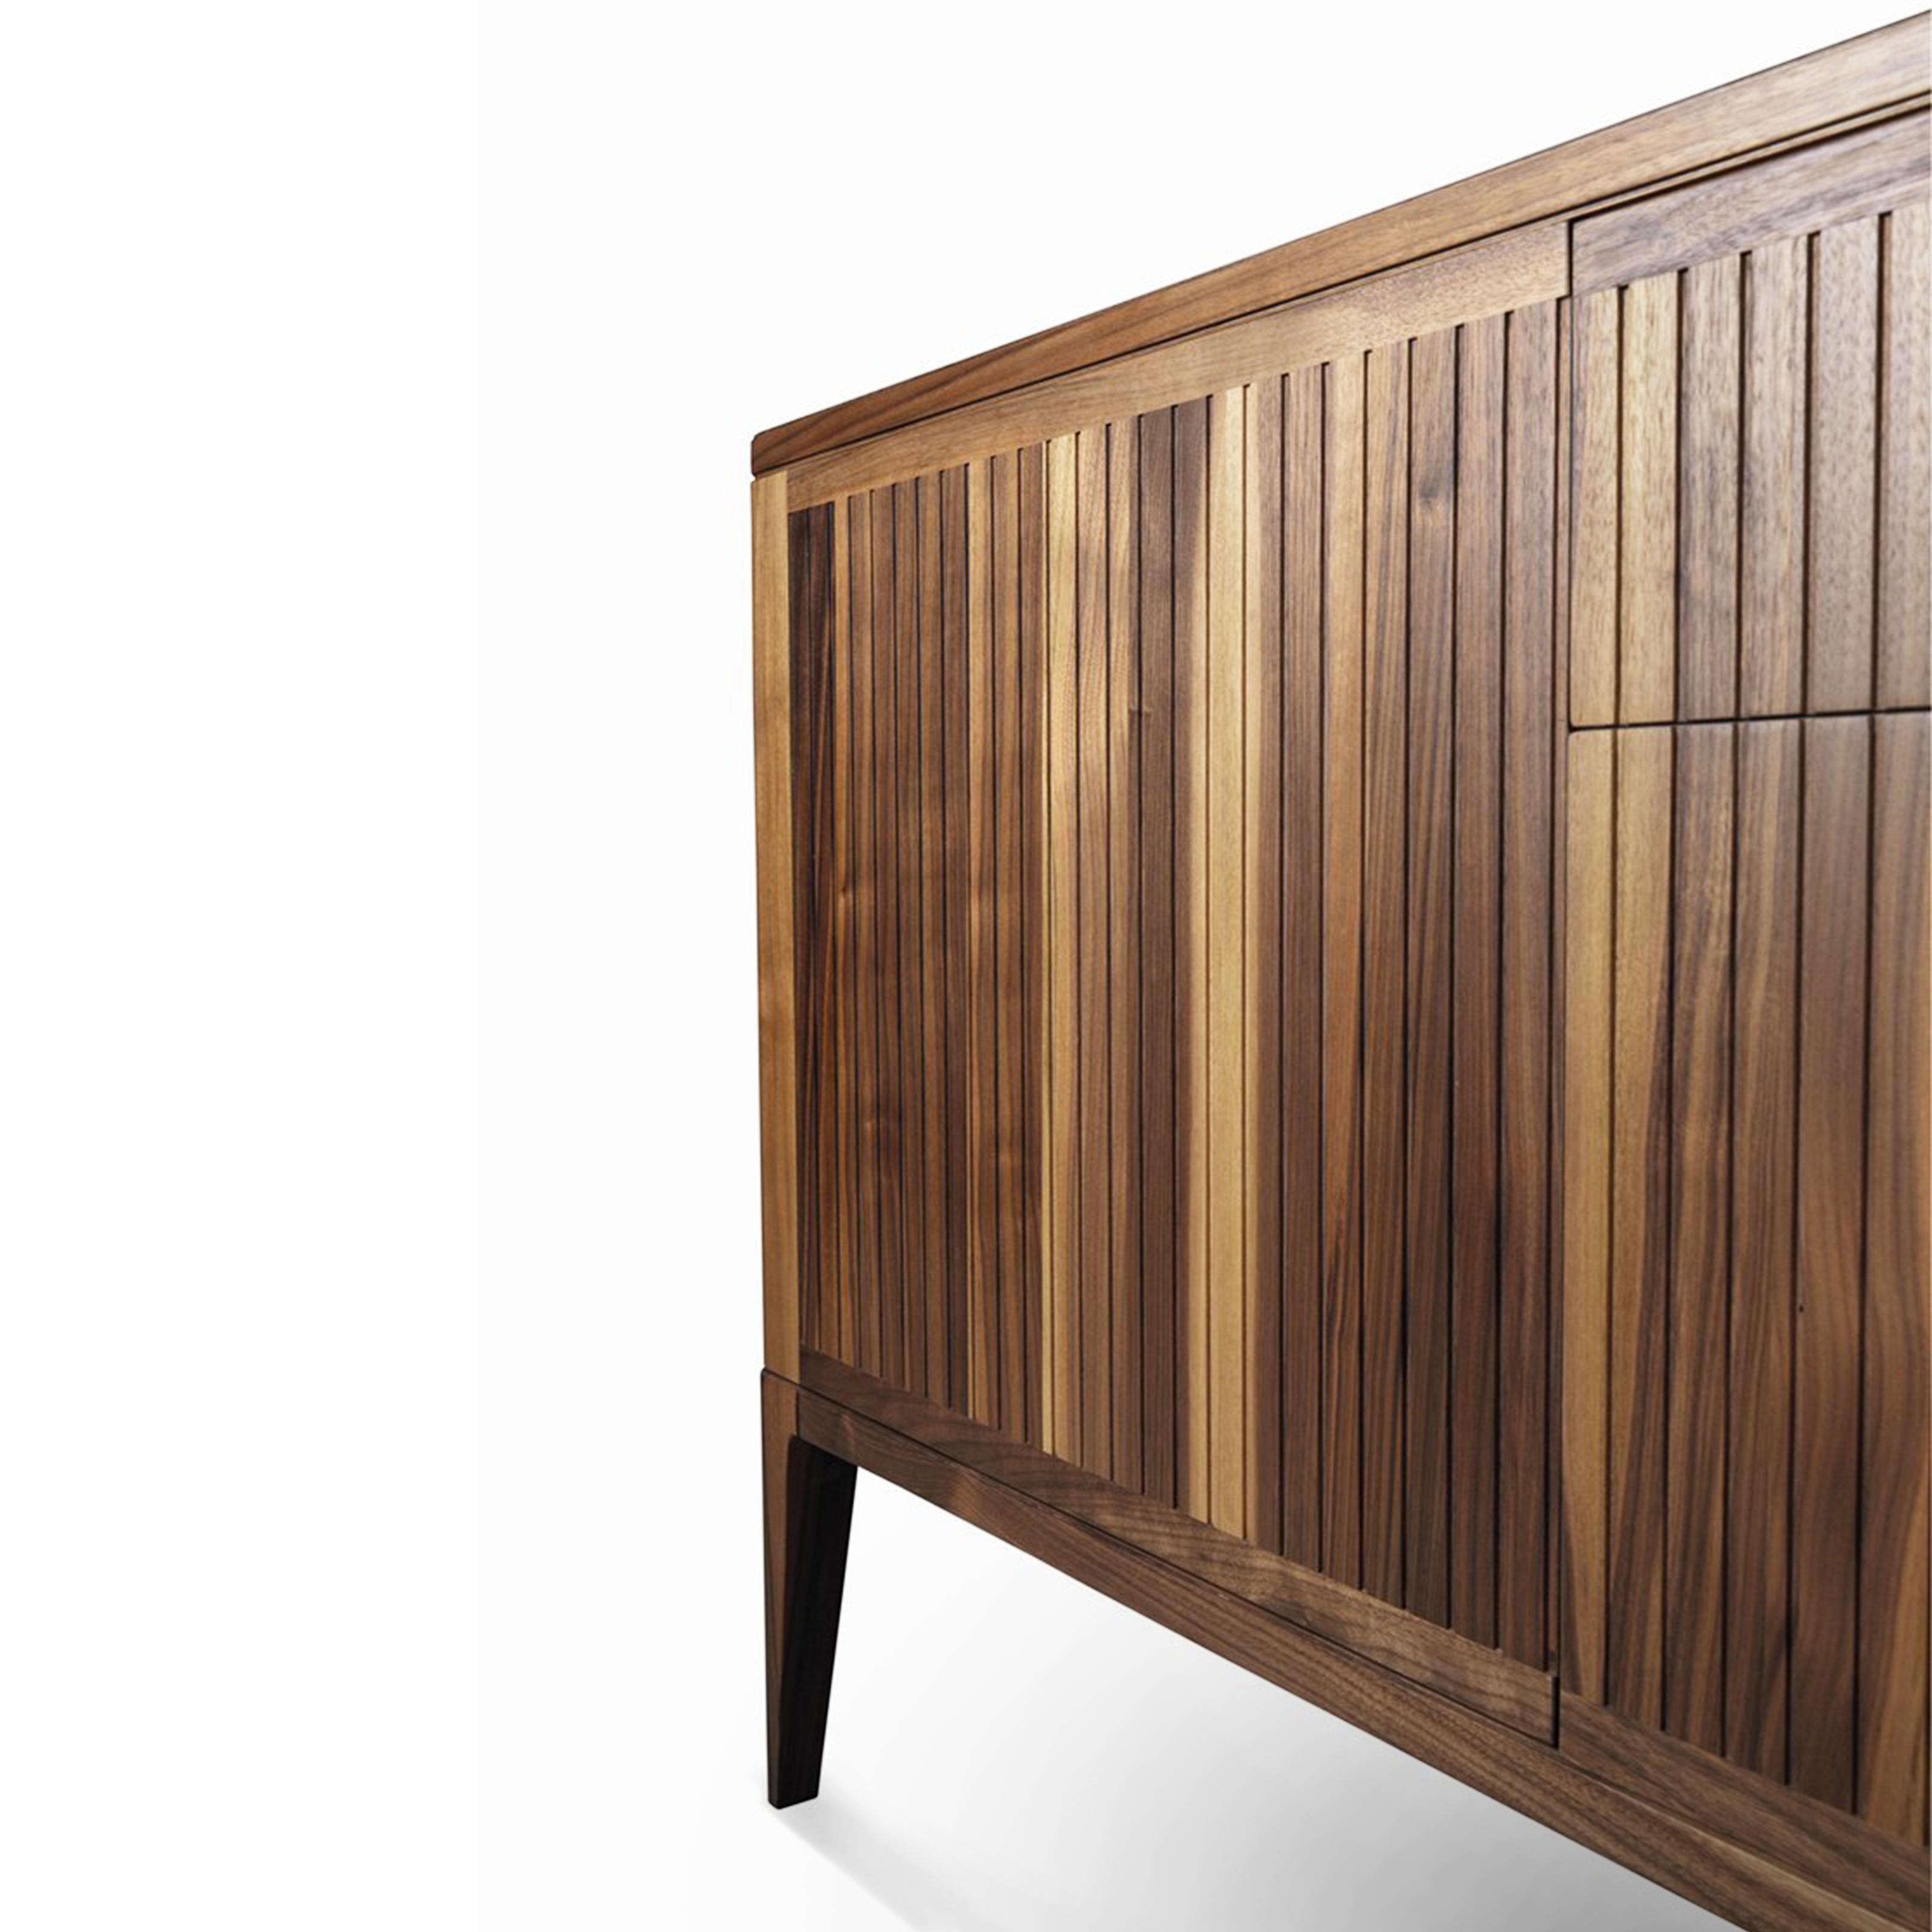 Glass Eleva Solid Wood Sideboard, Walnut in Hand-Made Natural Finish, Contemporary For Sale